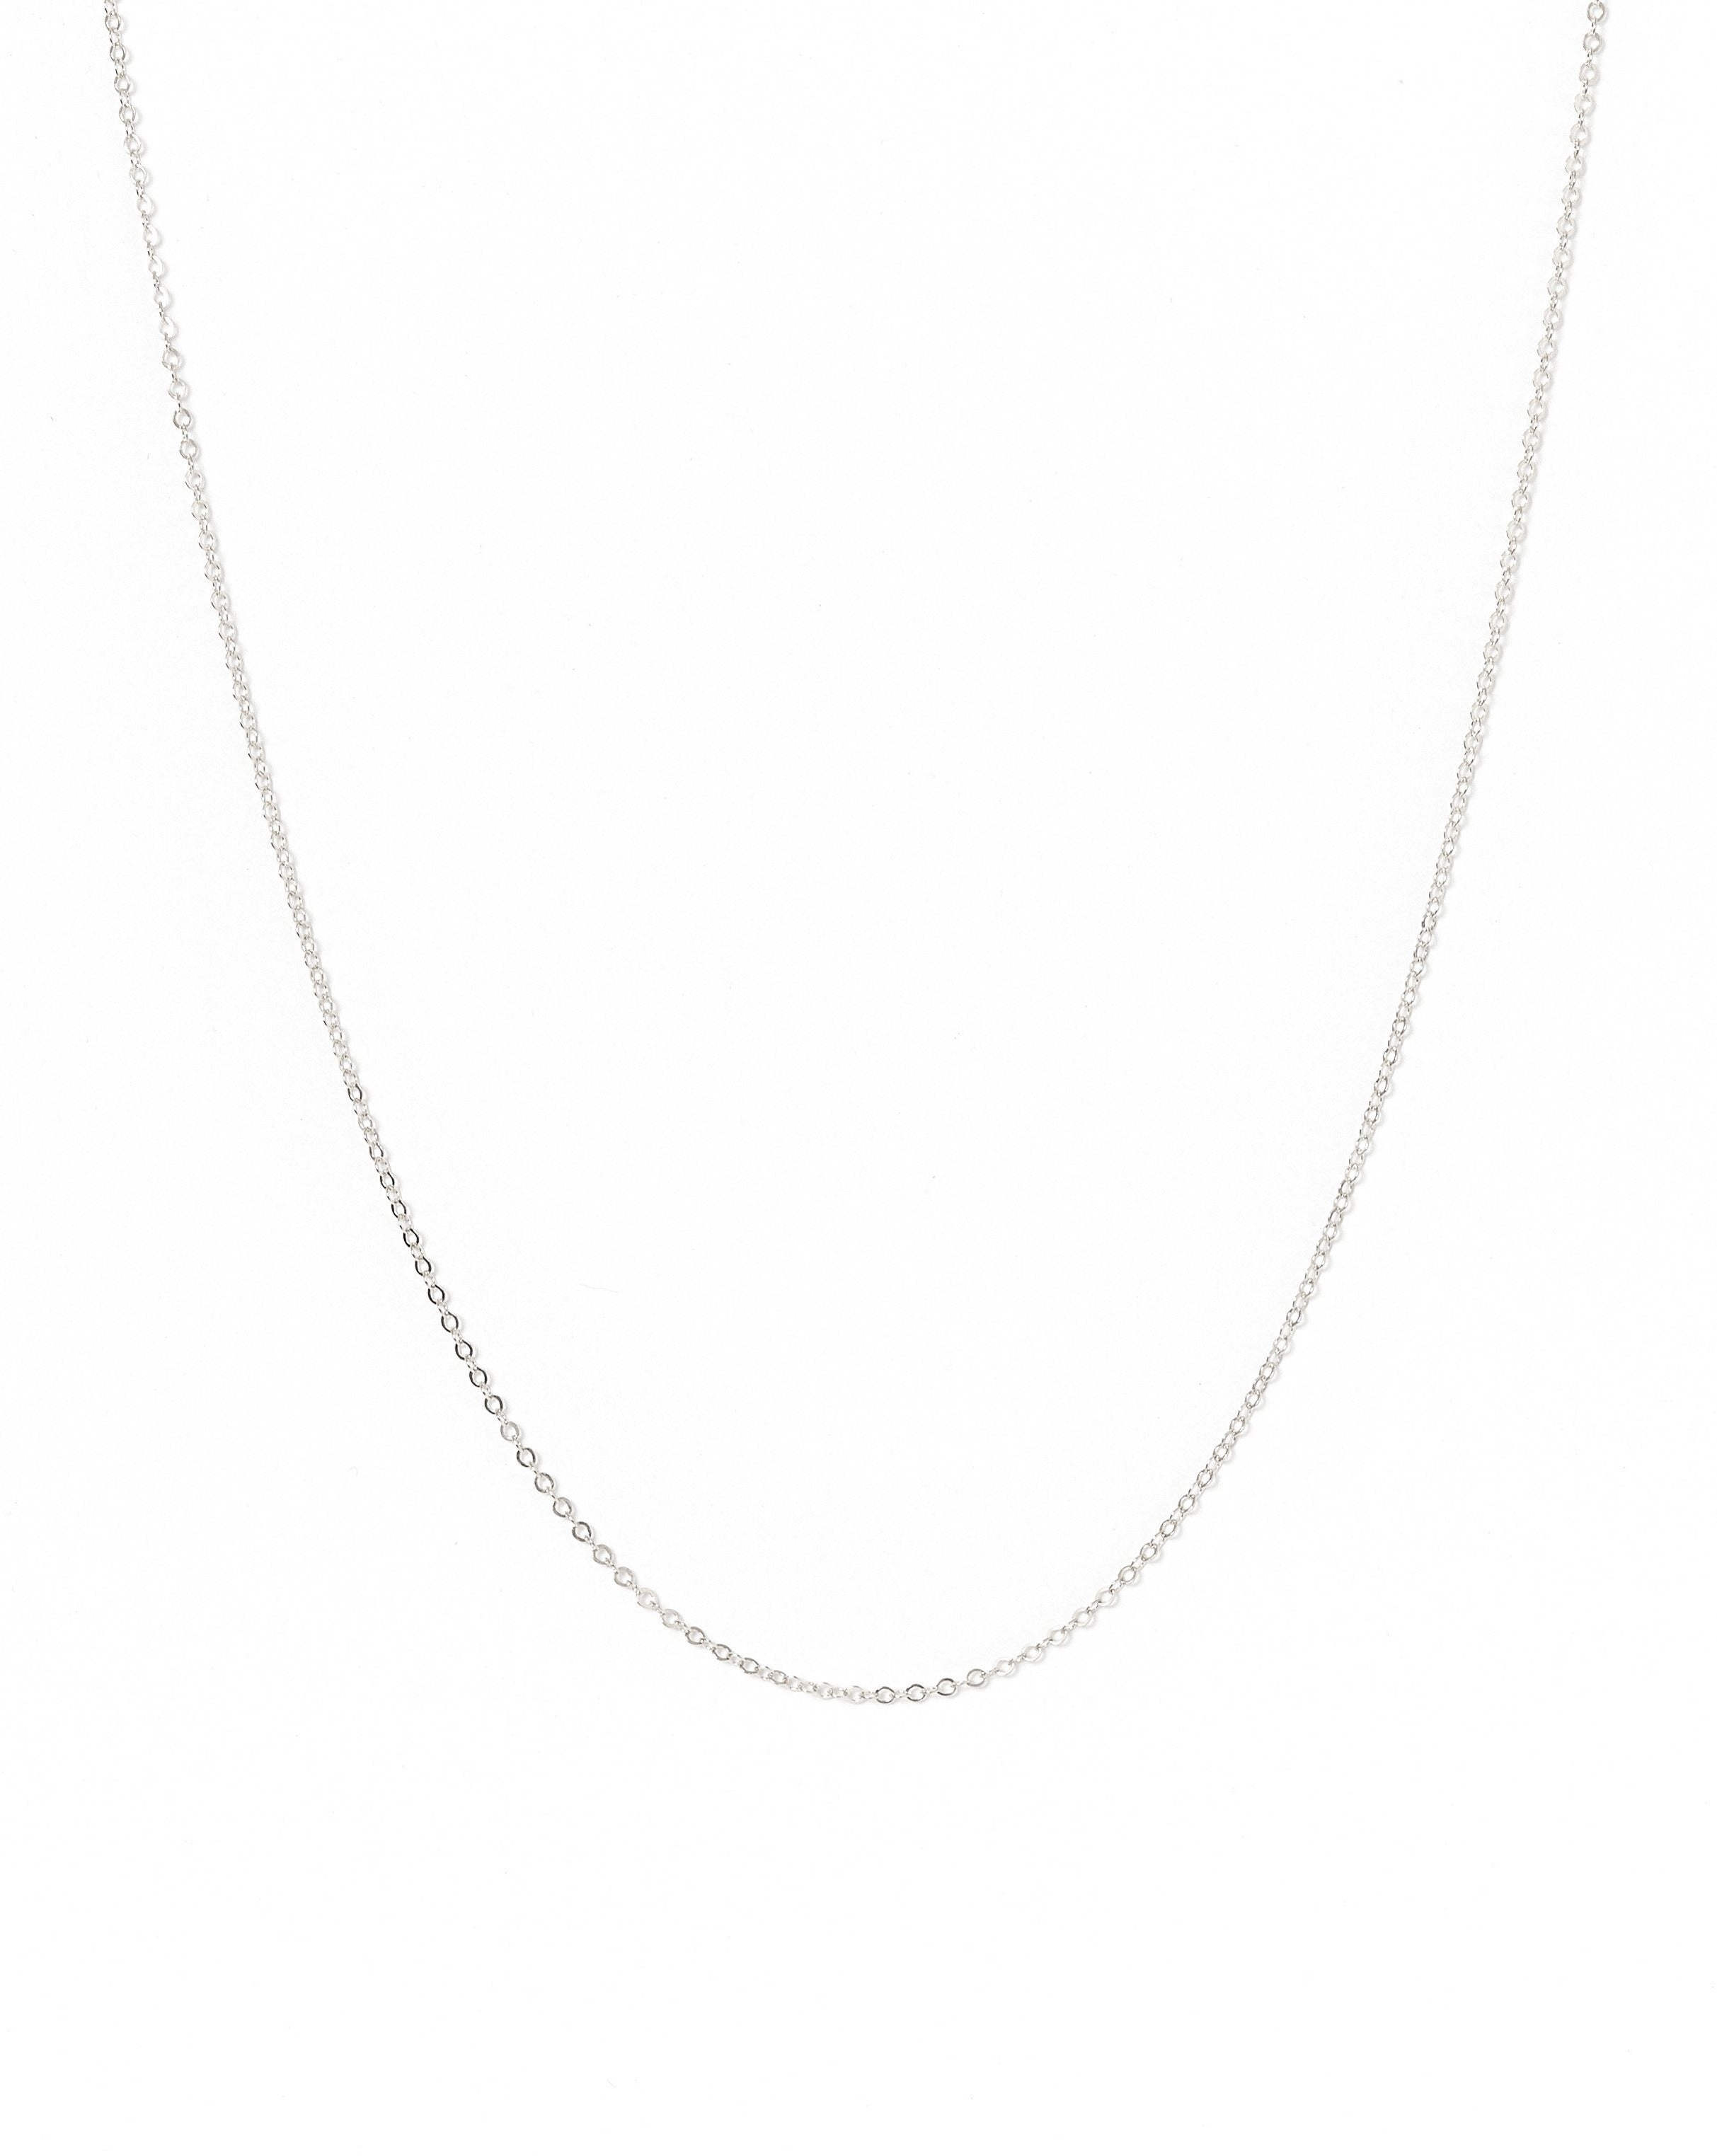 Minimalist Chain Necklace by KOZAKH. A handcrafted minimalist chain necklace in Sterling Silver, available in 4 adjustable lengths.